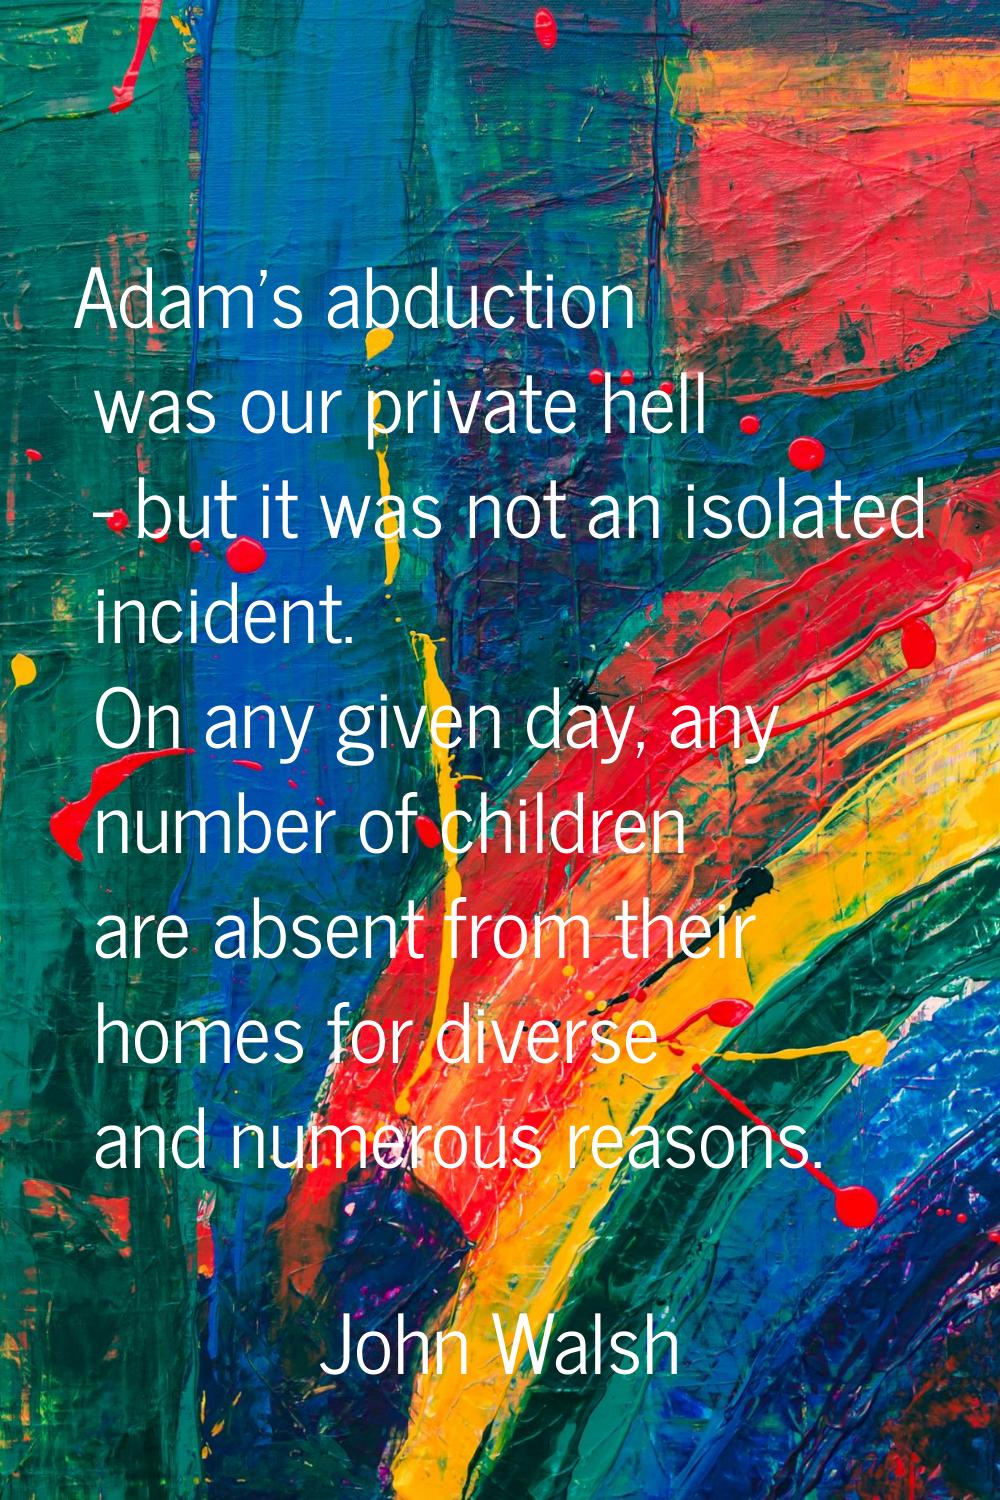 Adam's abduction was our private hell - but it was not an isolated incident. On any given day, any 